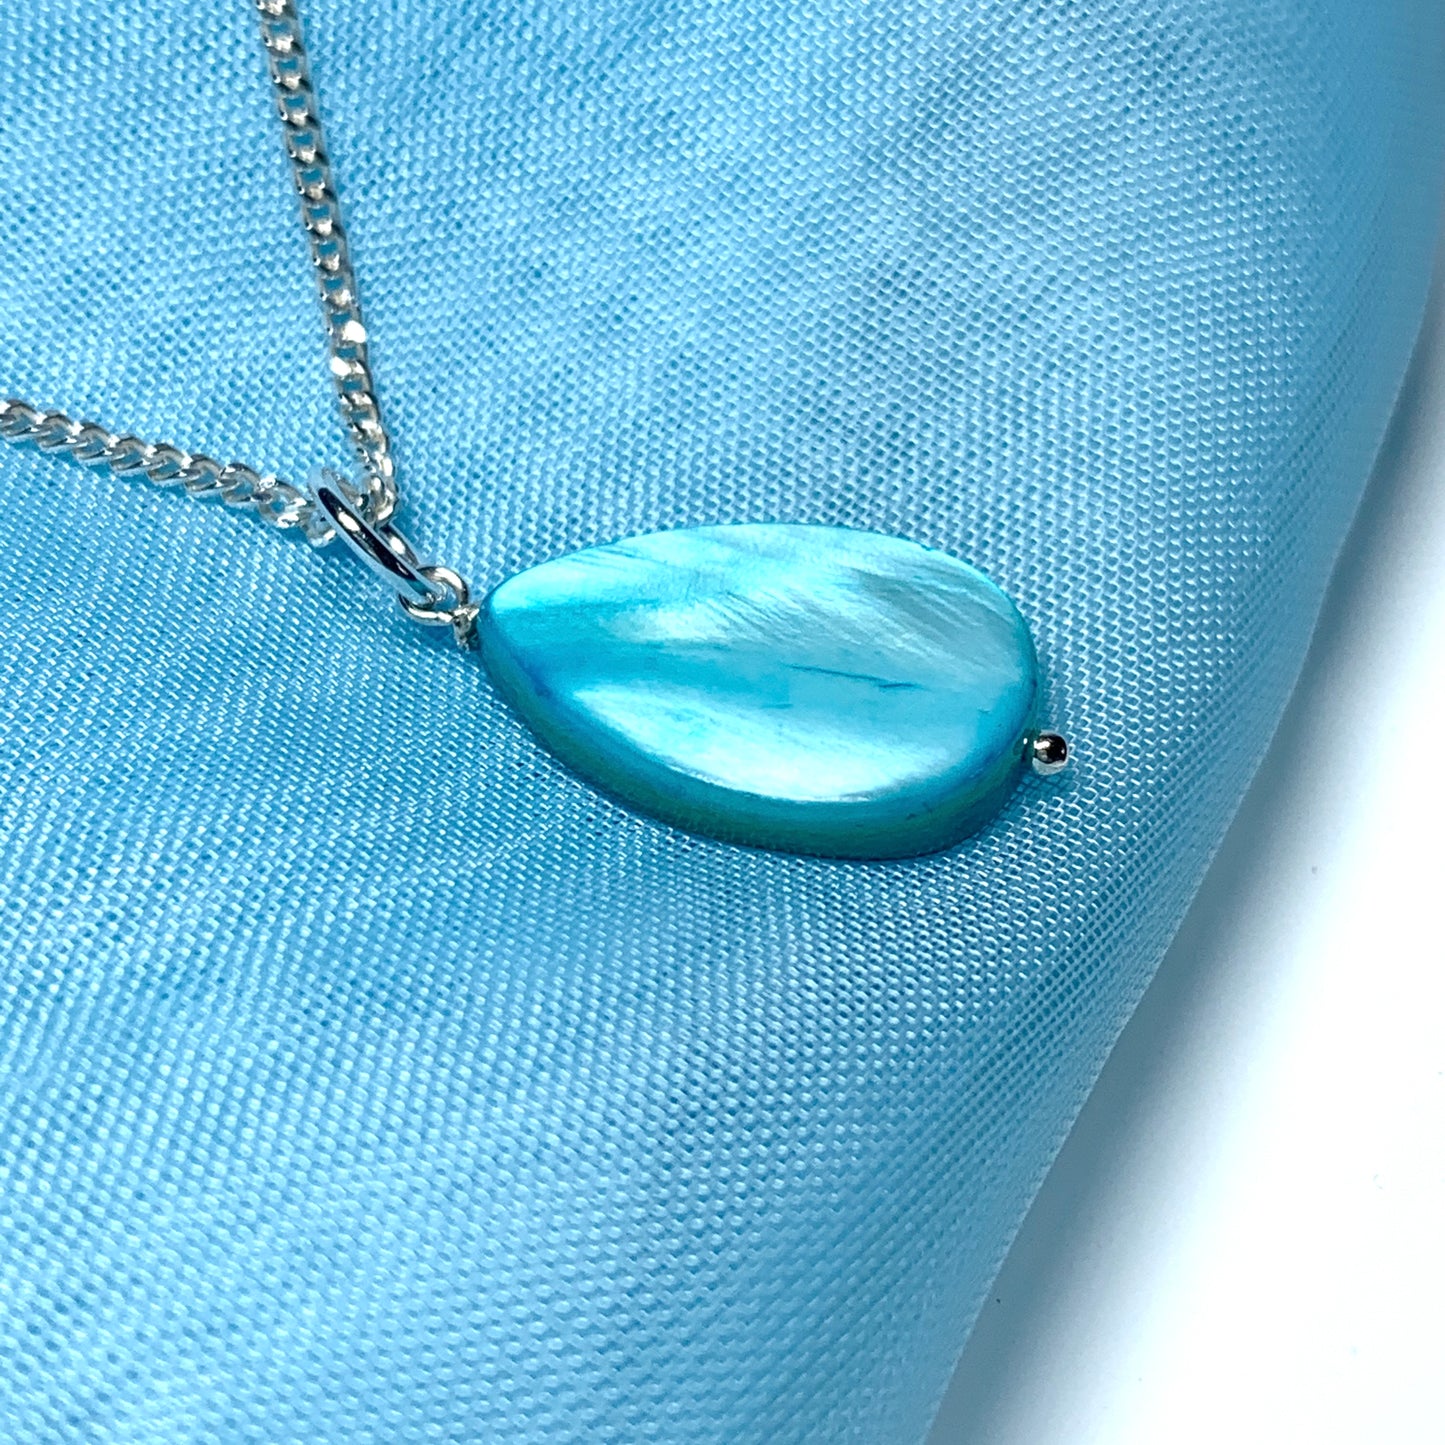 Turquoise Mother of Pearl Balloon Sterling Silver Necklace